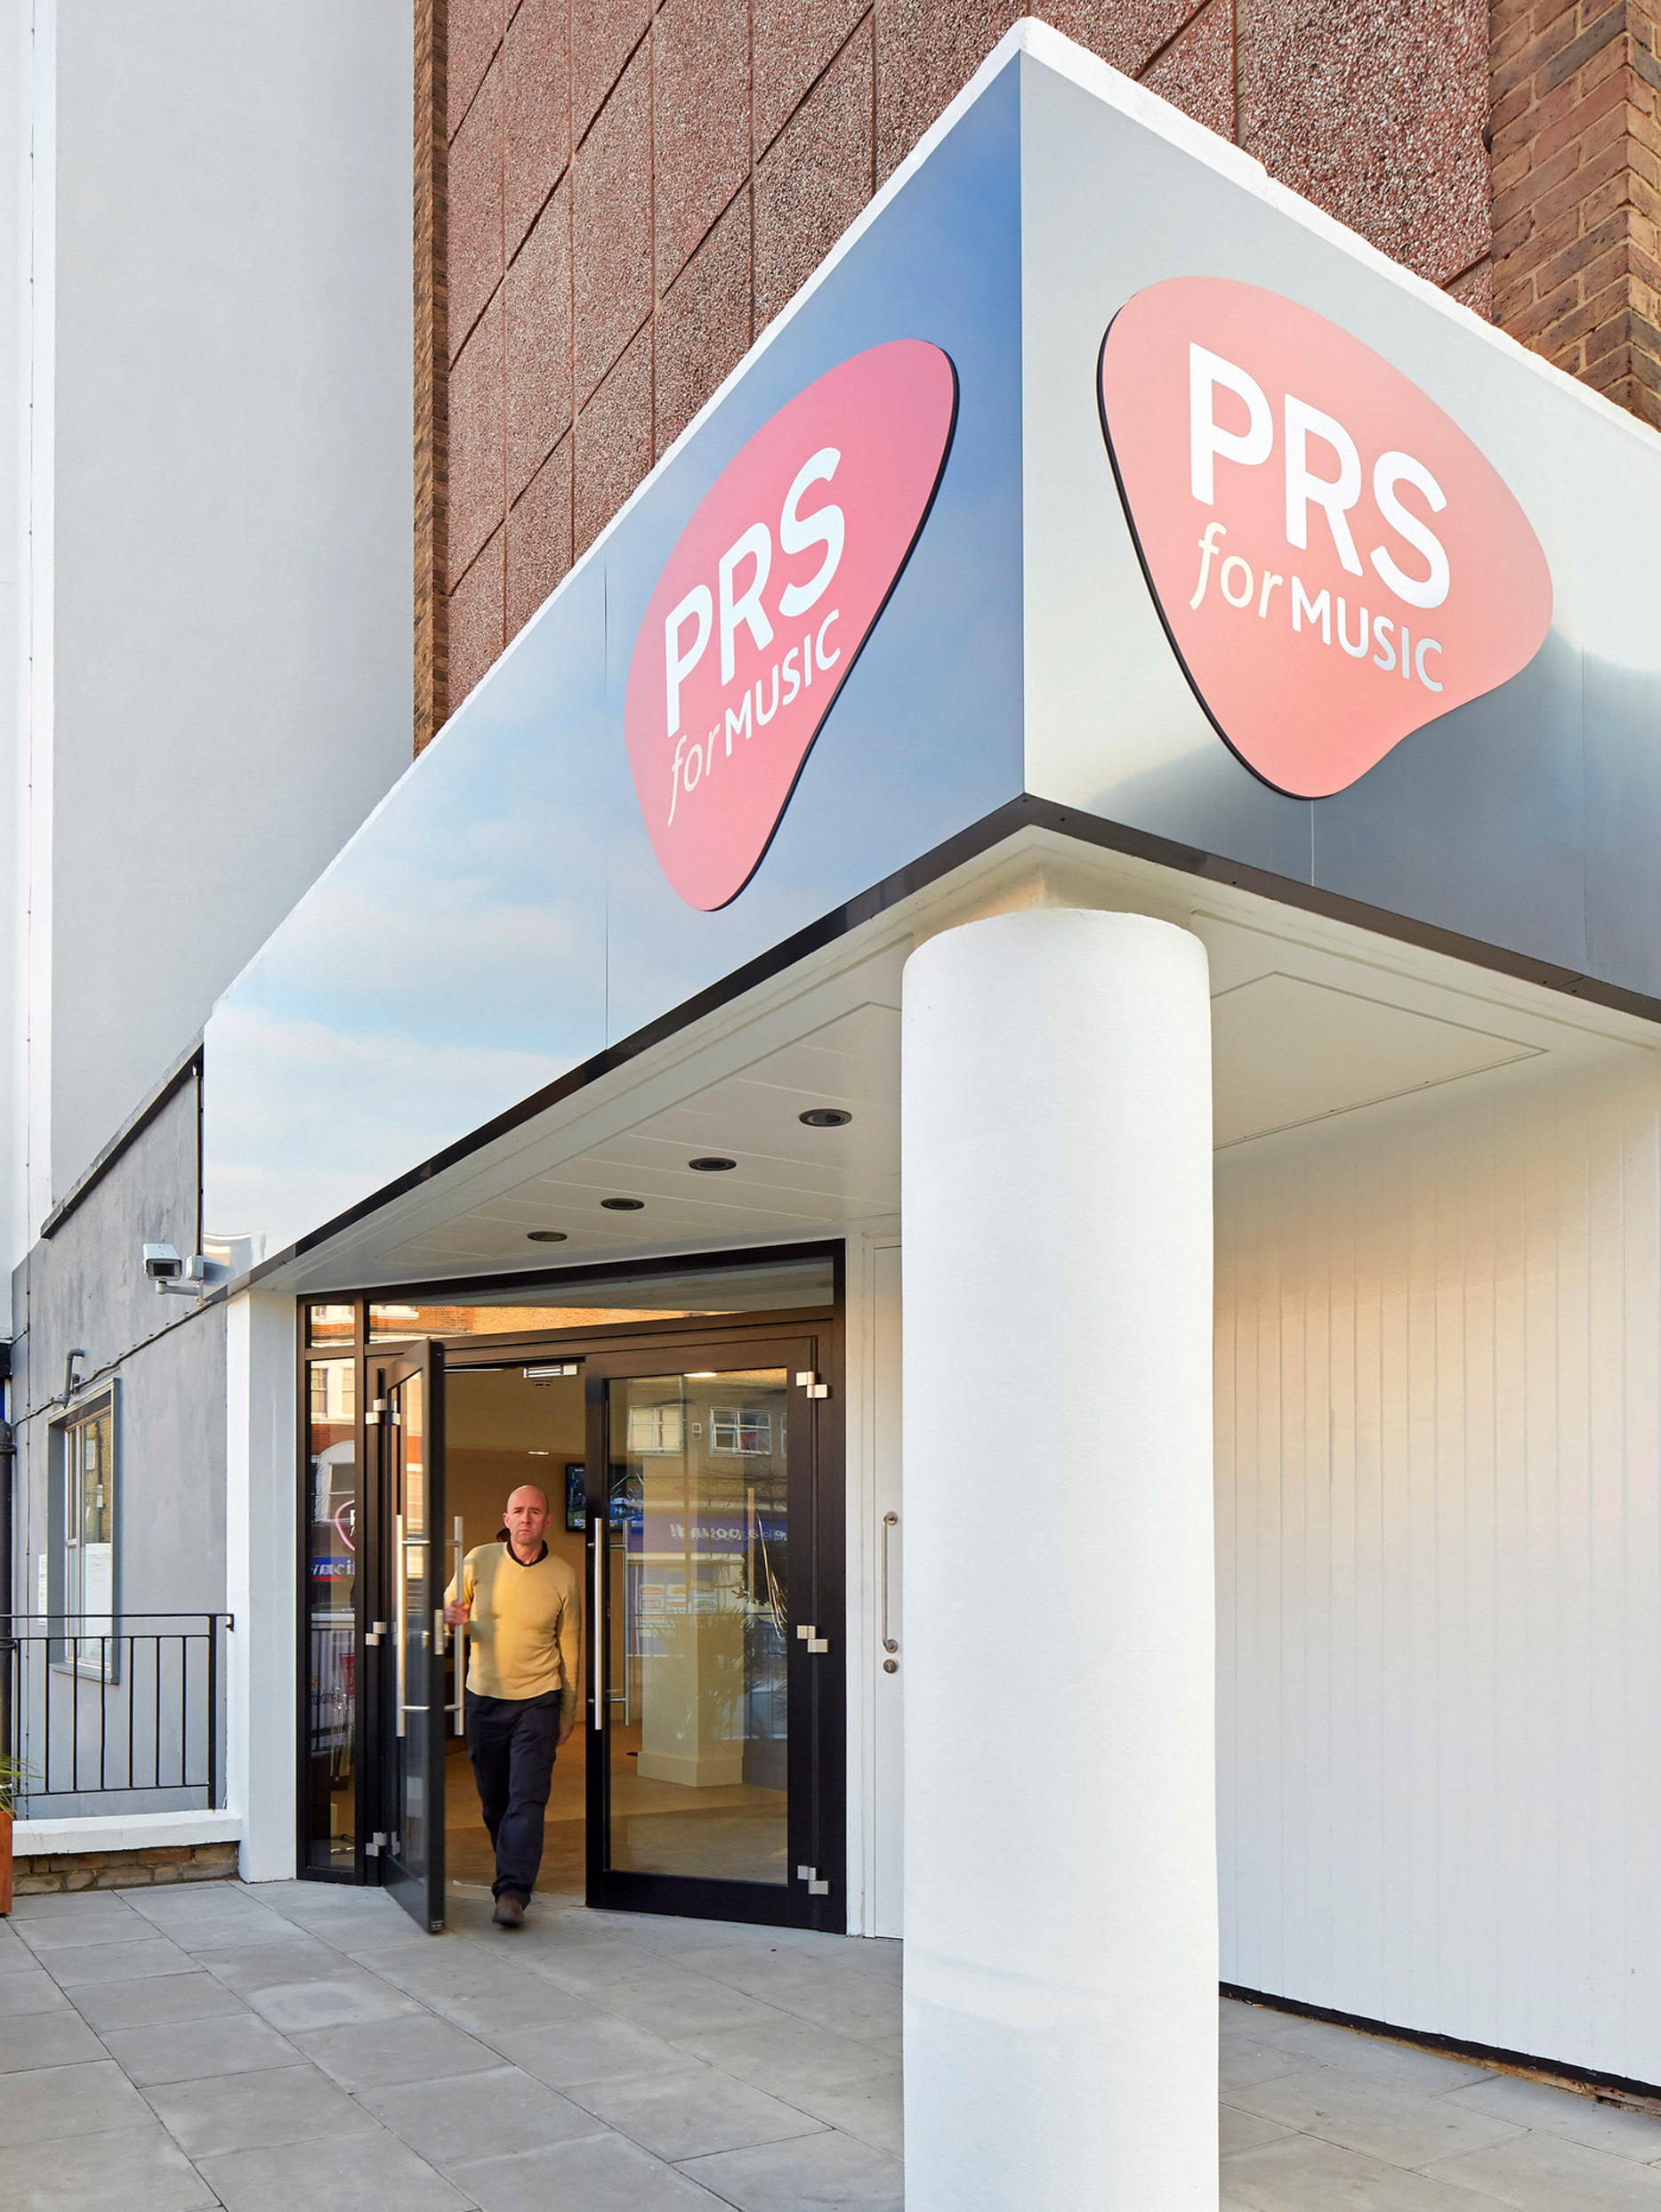 Modern storefront with a bold PRS for Music sign in vibrant pink and blue, showcasing a clean, minimalist design with large glass doors, a sleek overhang, and an inviting, open entryway.